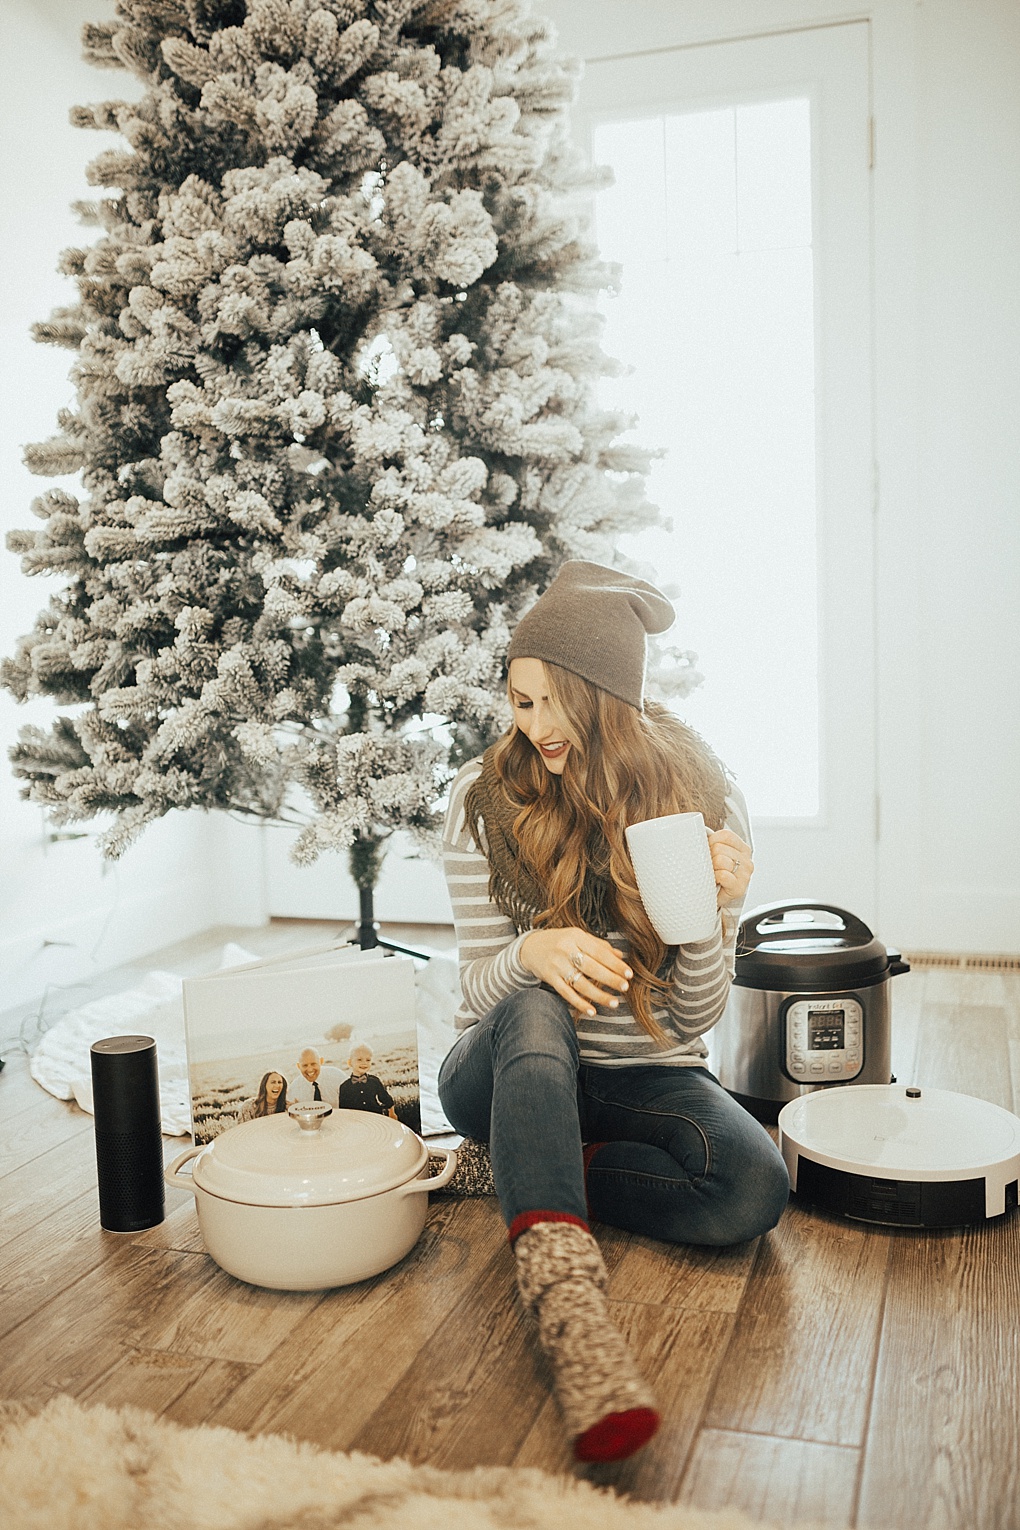 5 Awesome Parents Gift Ideas They'll Love by Utah lifestyle blogger Dani Marie